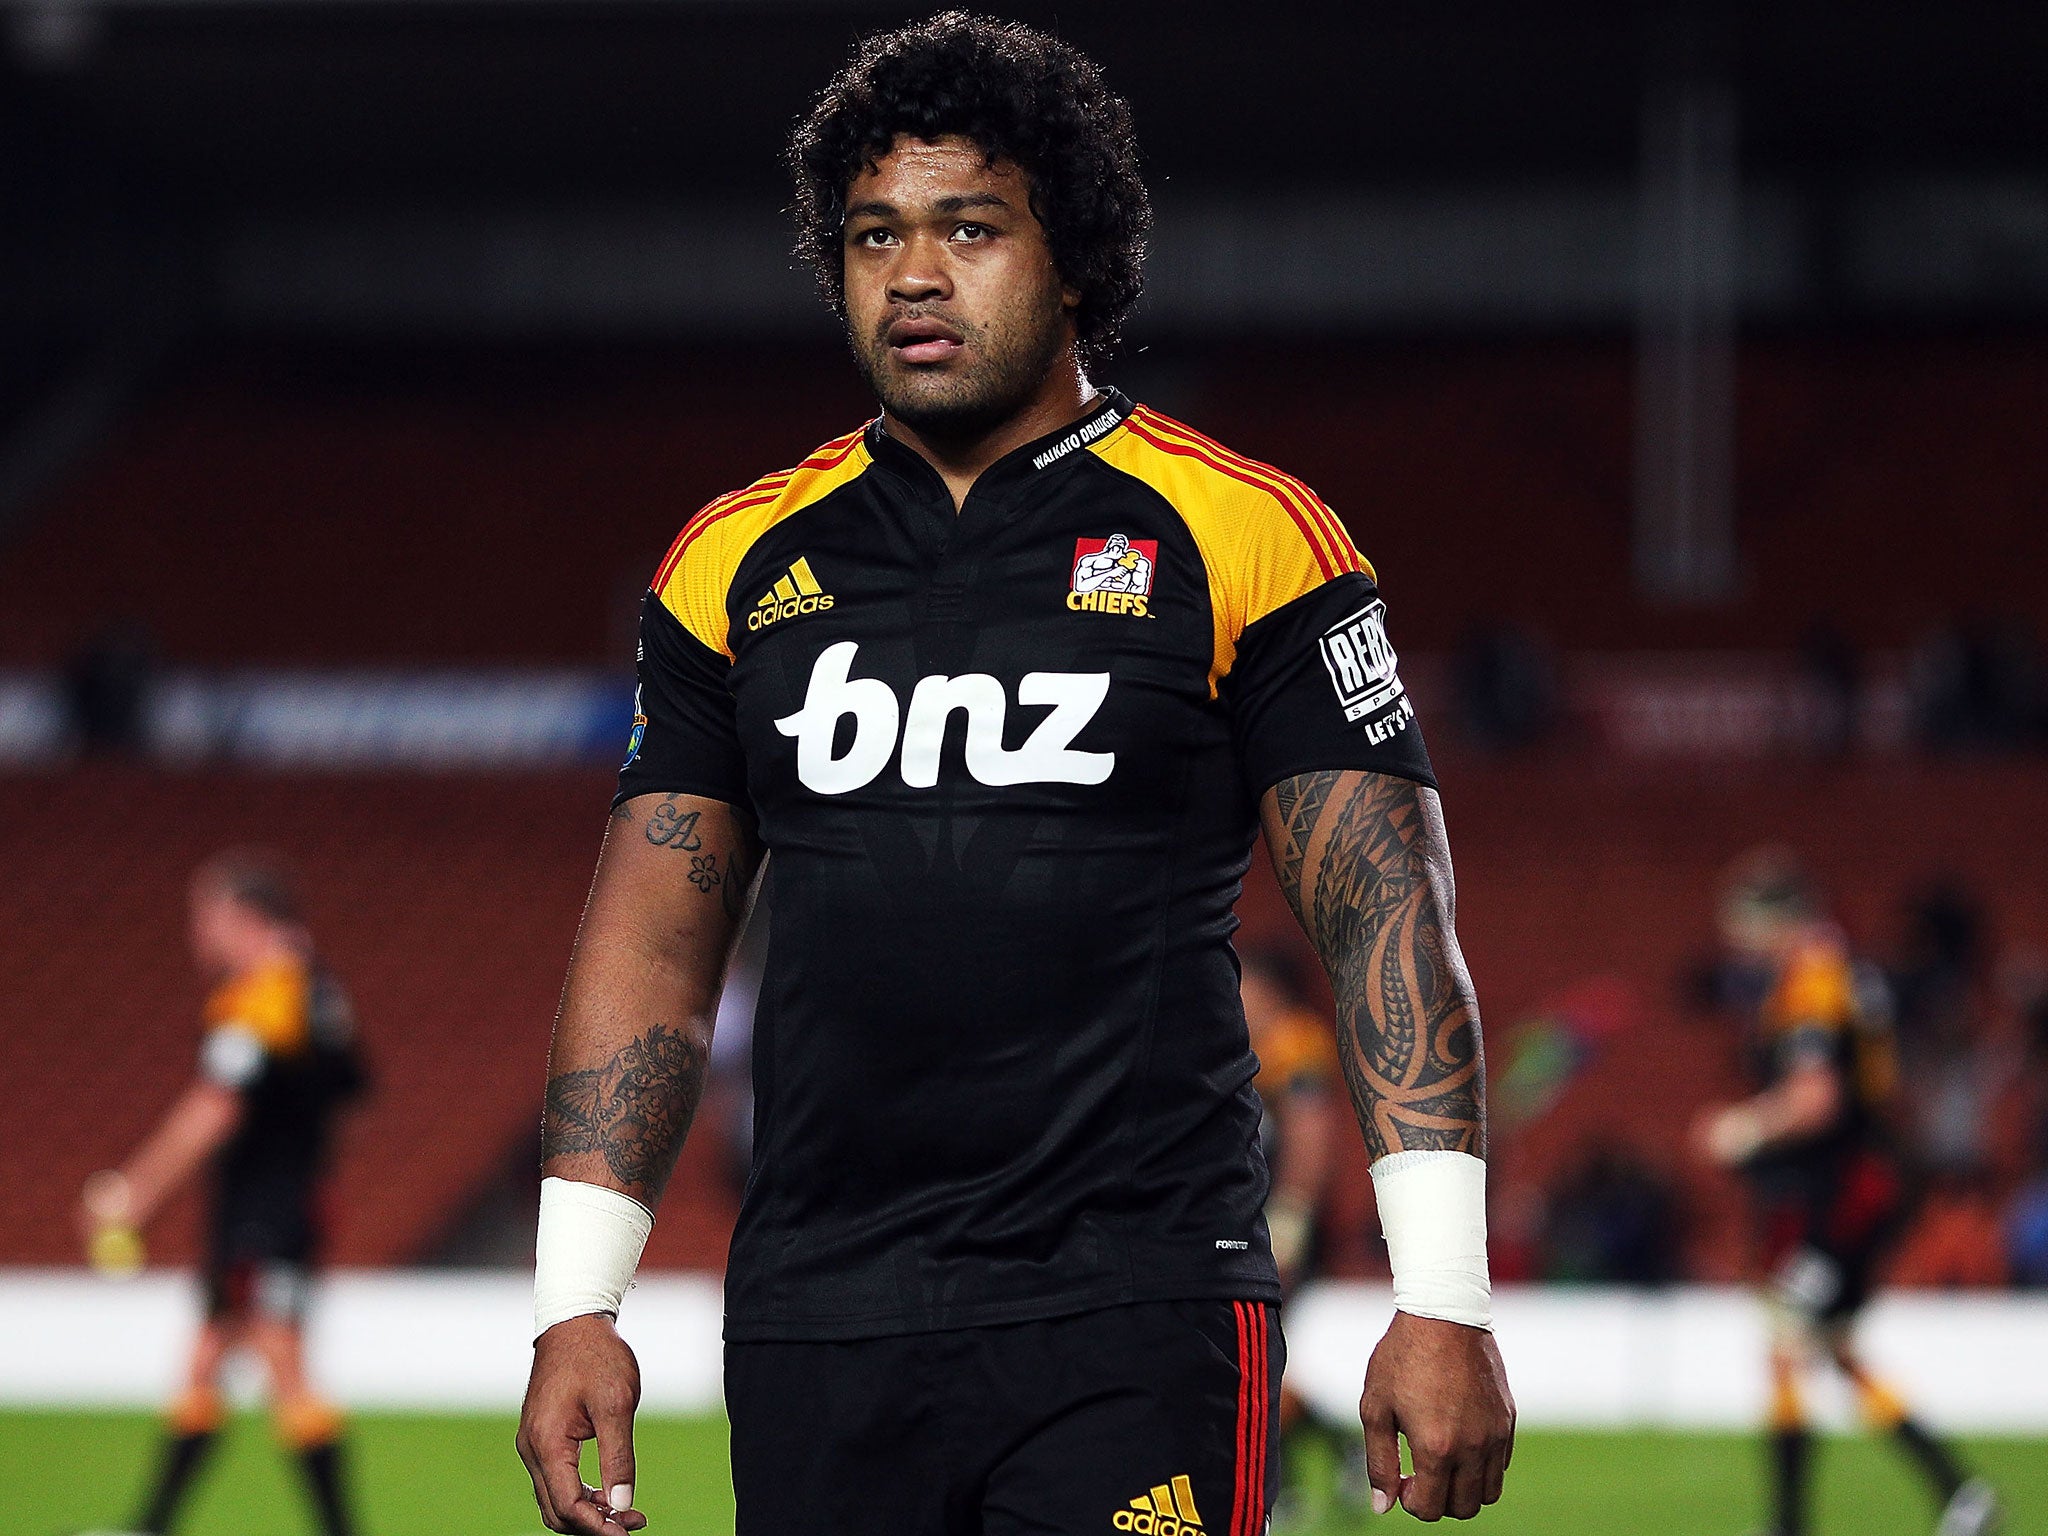 Lauaki debuted for the Chiefs in 2004, playing 70 games in total for the side